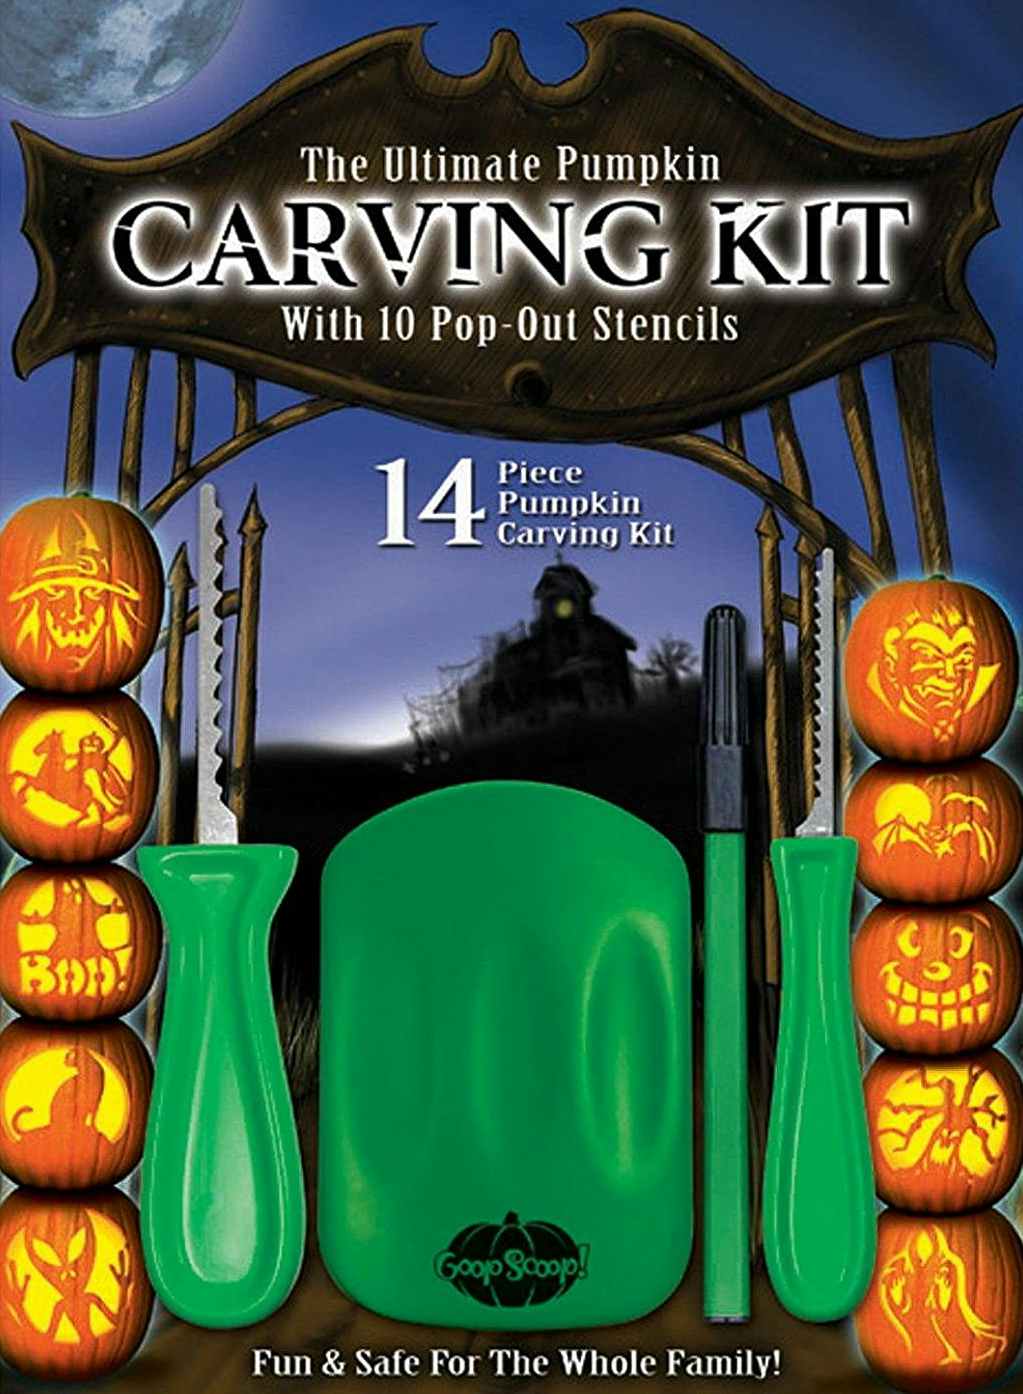 best pumpkin carving kit - A FunWorld Ultimate Pumpkin Carving Kit with 10 Pop-Out Stencils